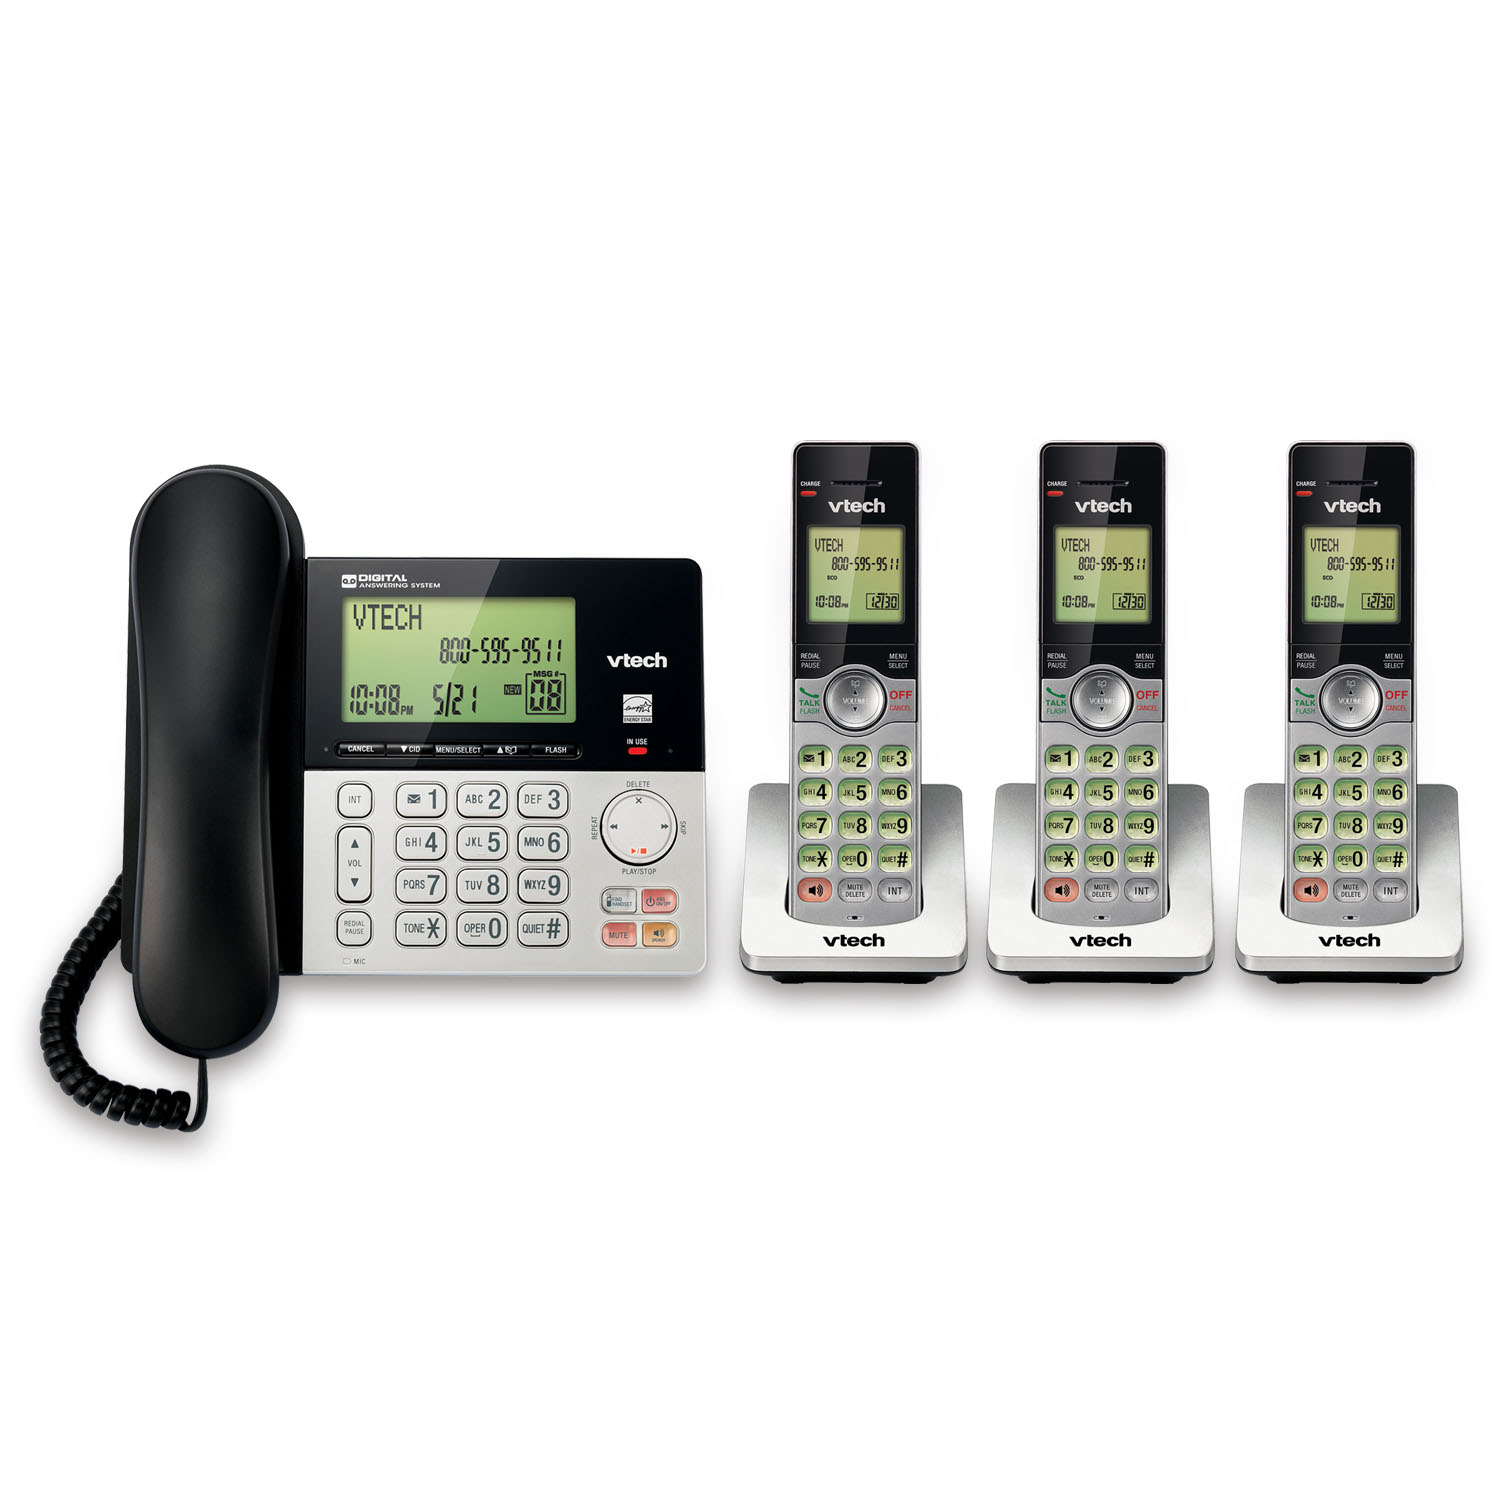 3 Handset Corded/Cordless Answering System with Caller ID/Call Waiting